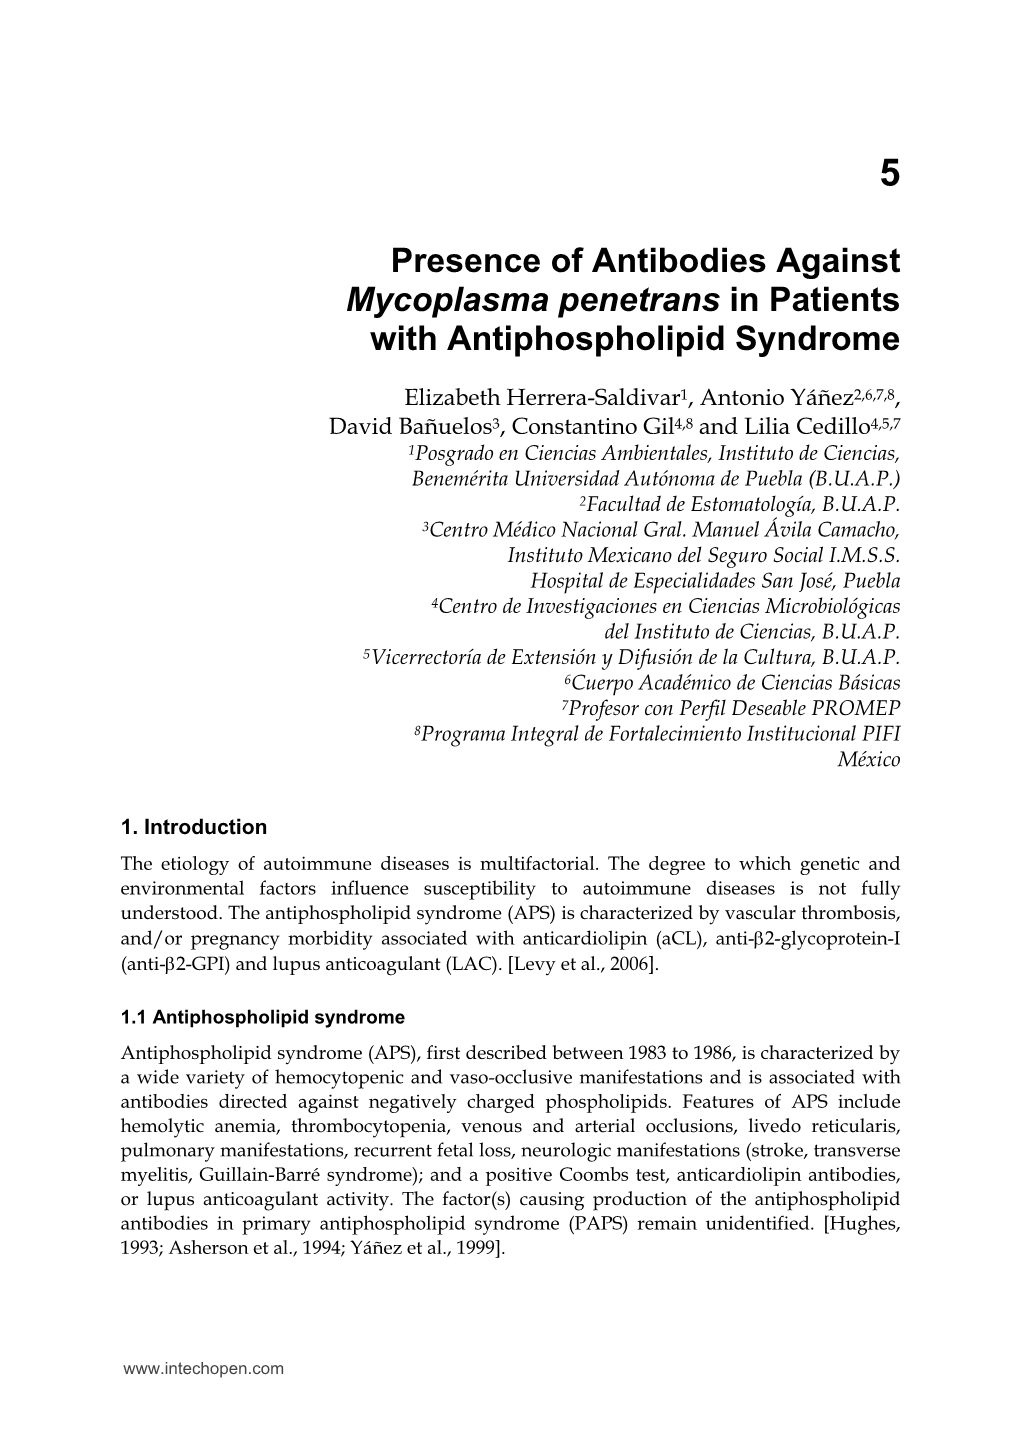 Presence of Antibodies Against Mycoplasma Penetrans in Patients with Antiphospholipid Syndrome